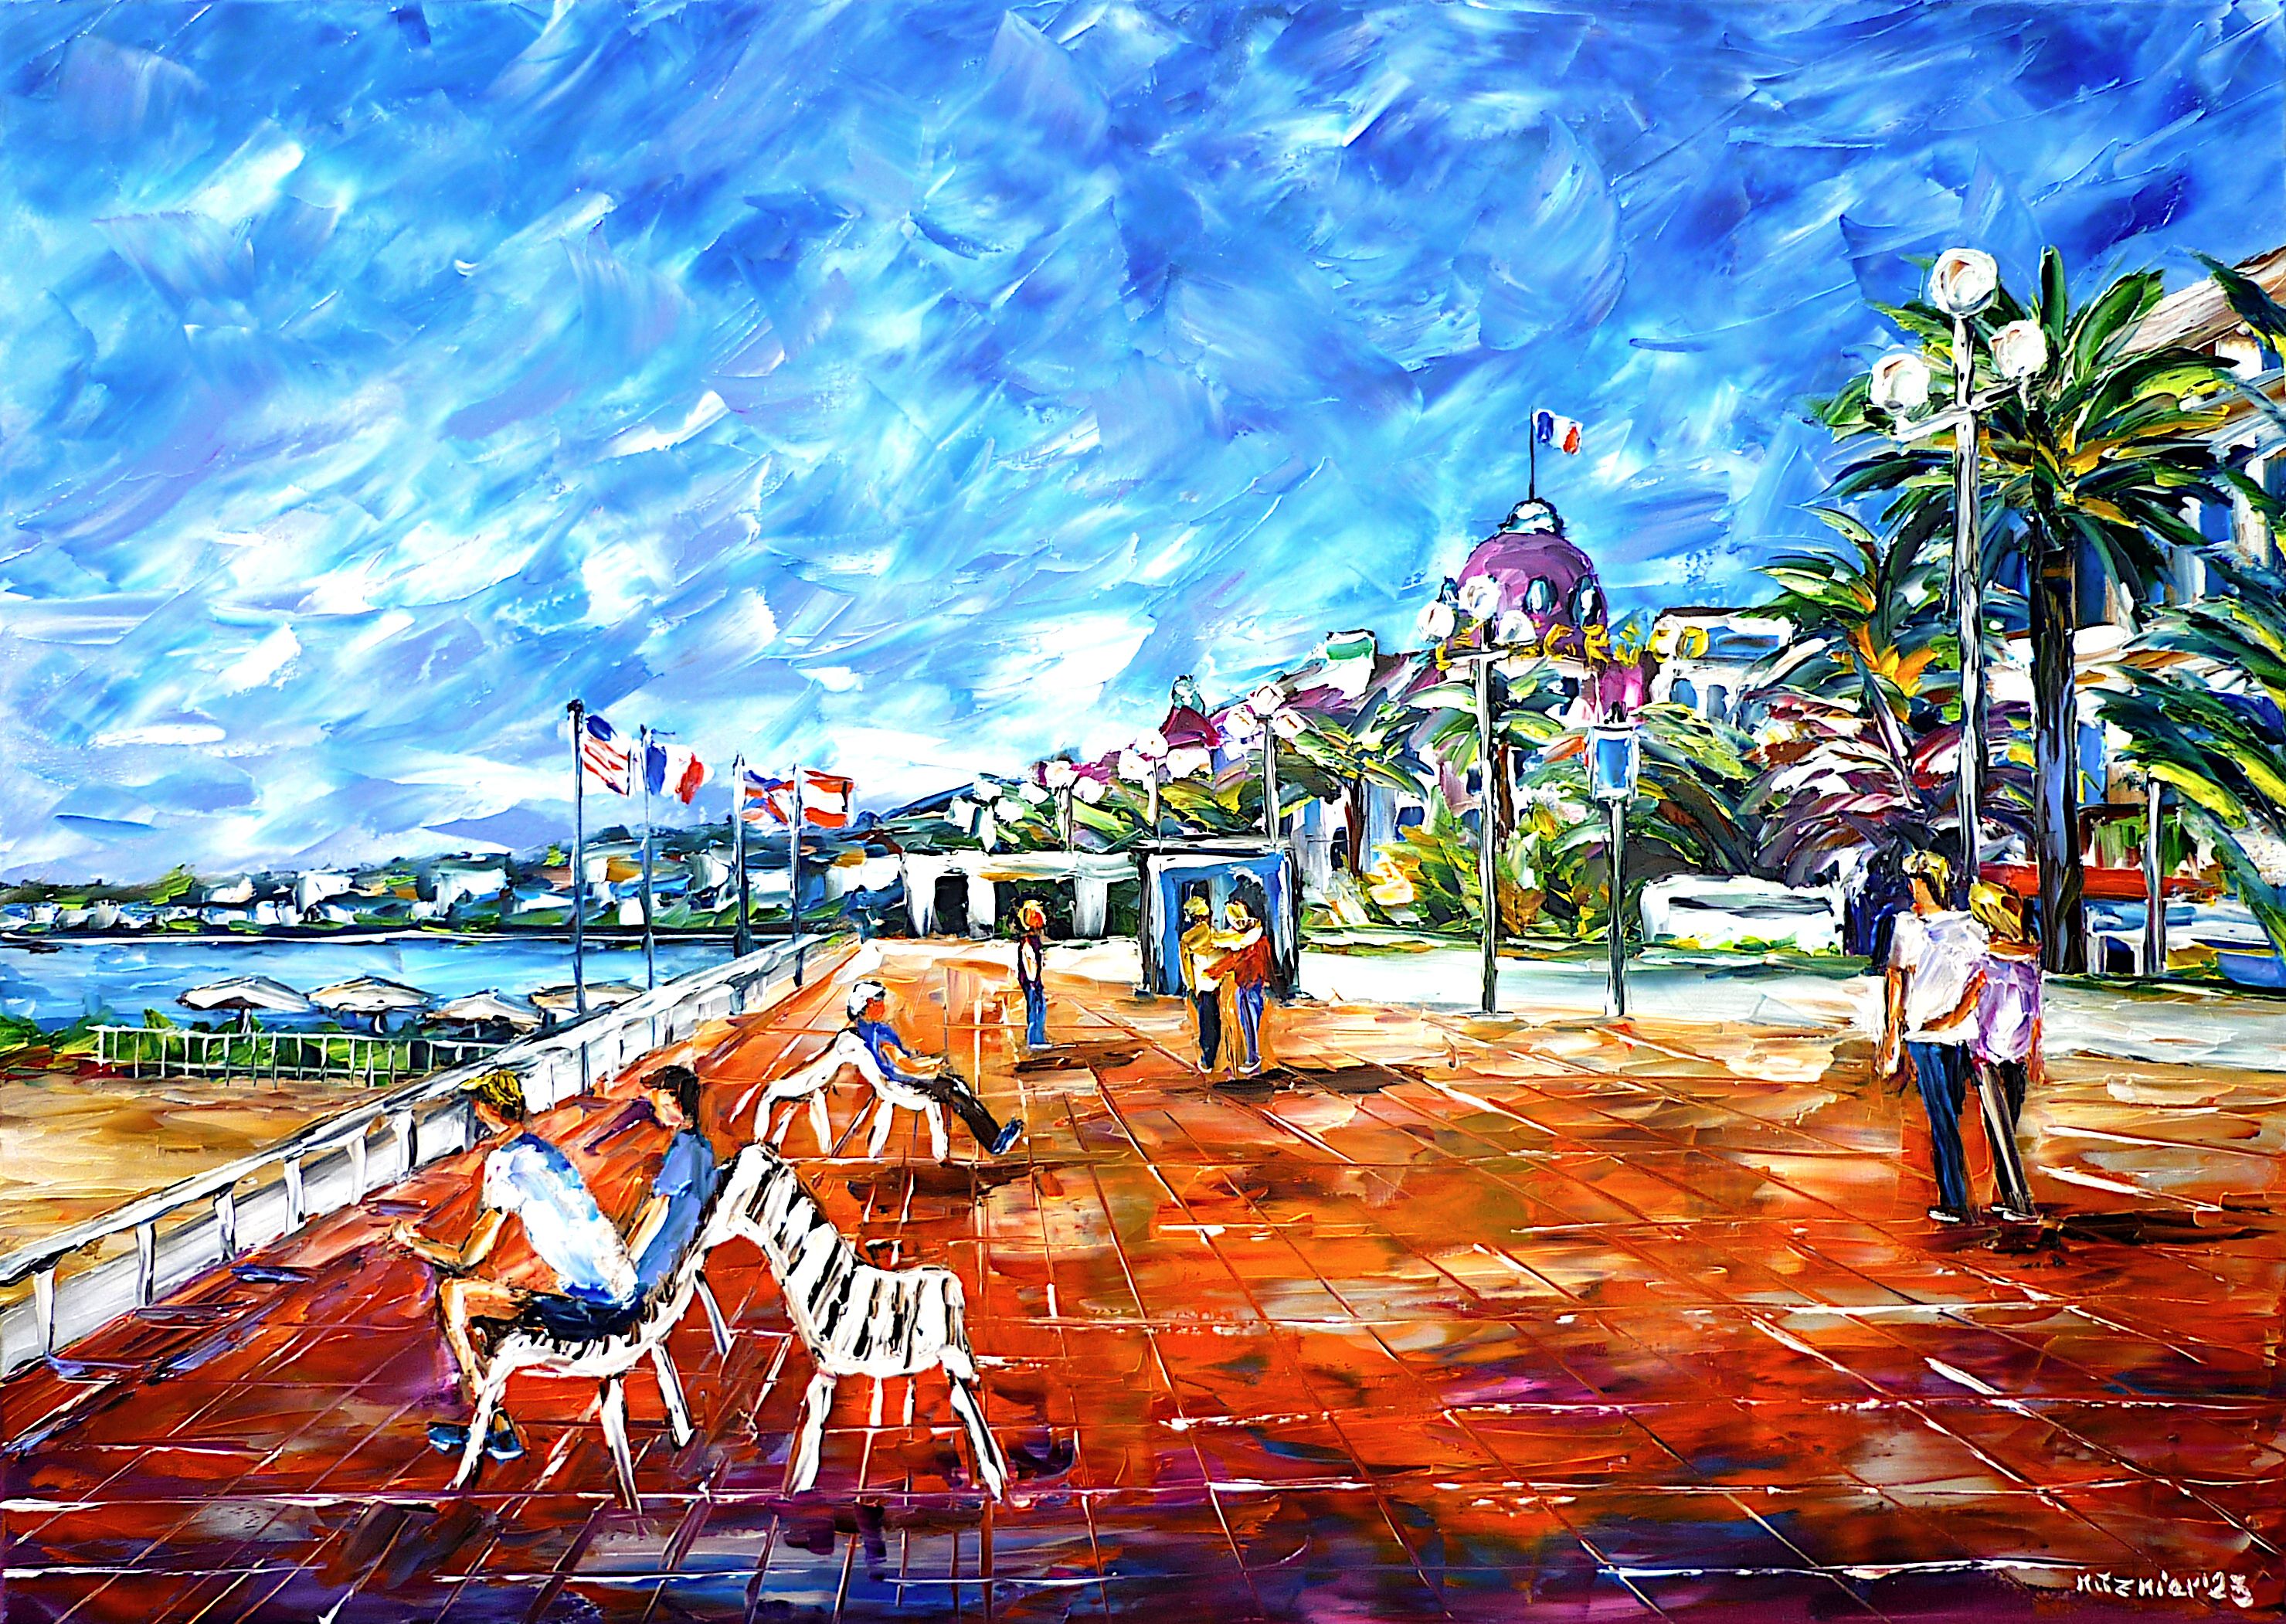 hotel le negresco,promenade des anglais scene,Promenade des Anglais people,Promenade des Anglais painting,nice france sitting by the sea,lovers in nice,lovers hugging,nice france walk,lovers in summer,love couple,lovers walking,people in love,sitting on the bench,enjoying summer,nice cityscape,nice view,le negresco painting,nice painting,nice picture,cote d'azur,summer in nice,southern france,french riviera,summer on the cote d'azur,summer in south of france,beautiful nice,nice beauty,nice scene,nice love,nice lover,beautiful south of france,south of france love,south of france lover,i love nice,i love south of france,palette knife oil painting,modern art,figurative art,figurative painting,contemporary painting,abstract painting,lively colors,colorful painting,bright colors,impasto painting